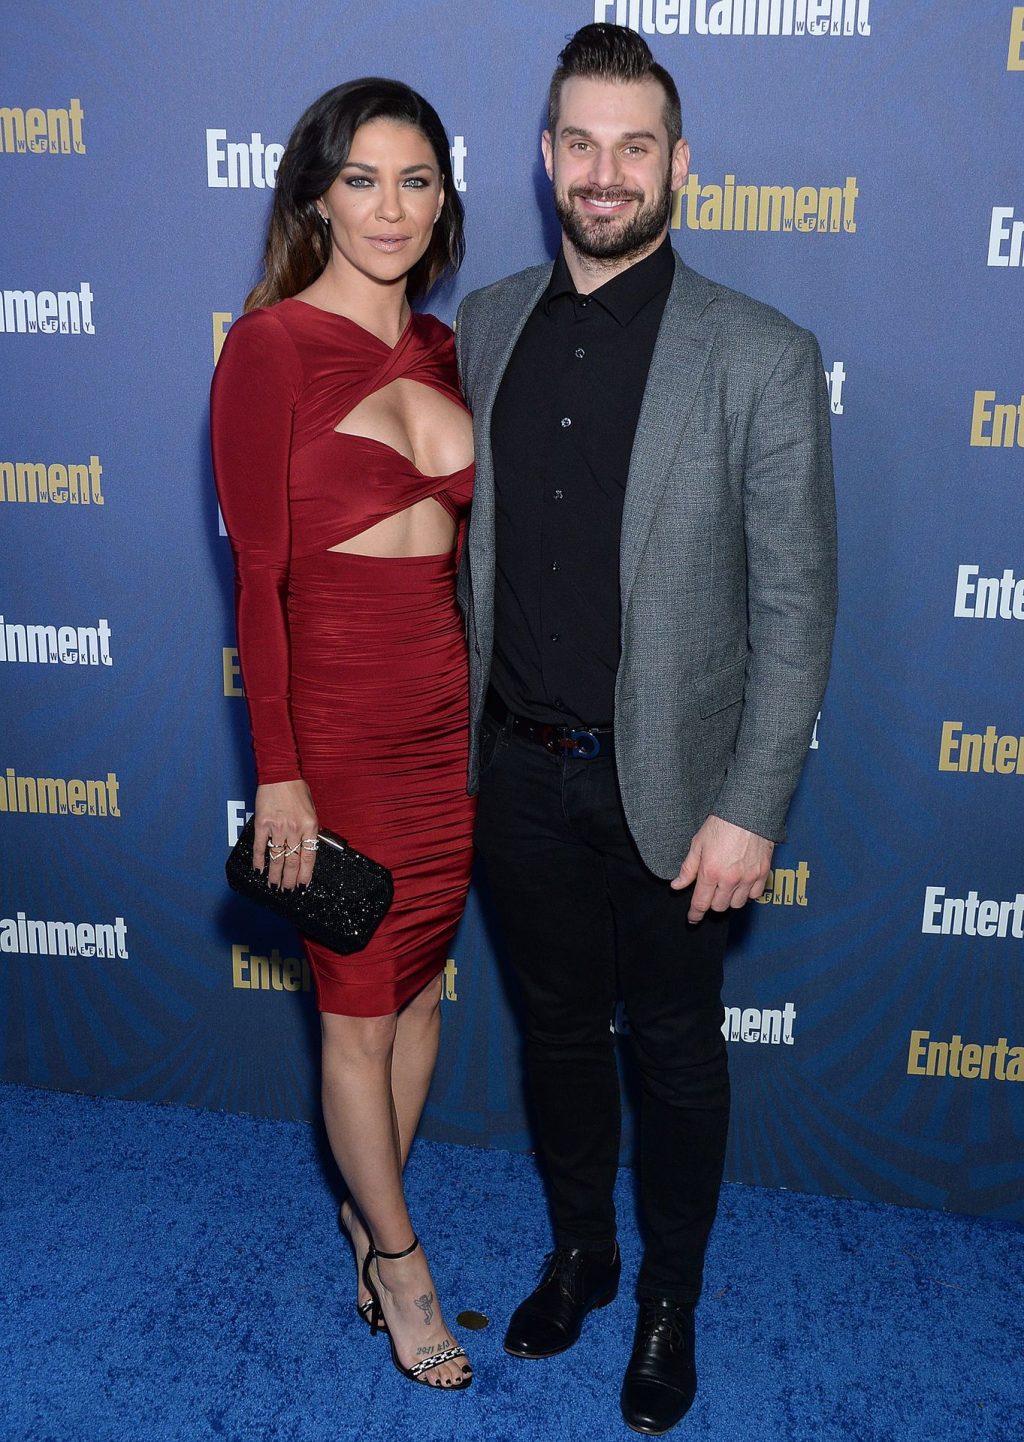 Jessica Szohr Shows her Cleavage at the Entertainment Weekly Pre-SAG Awards Celebration (25 Photos)